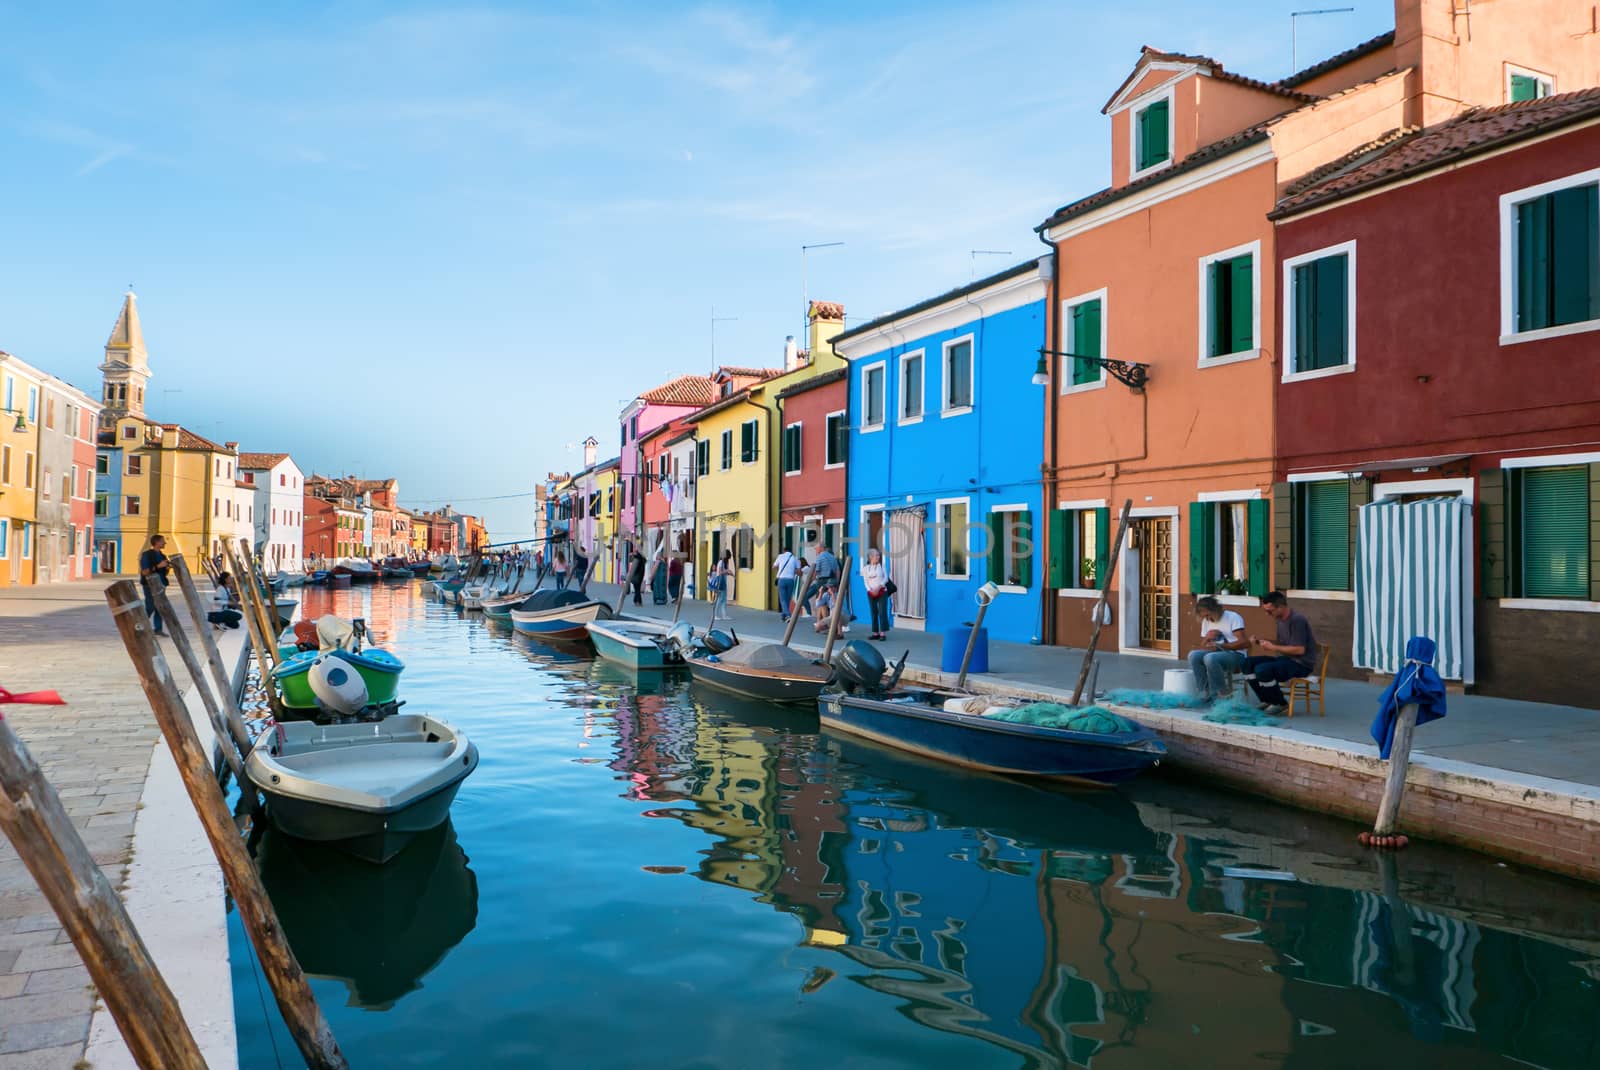 Typical brightly colored houses of Burano, Venice lagoon, Italy. by Isaac74